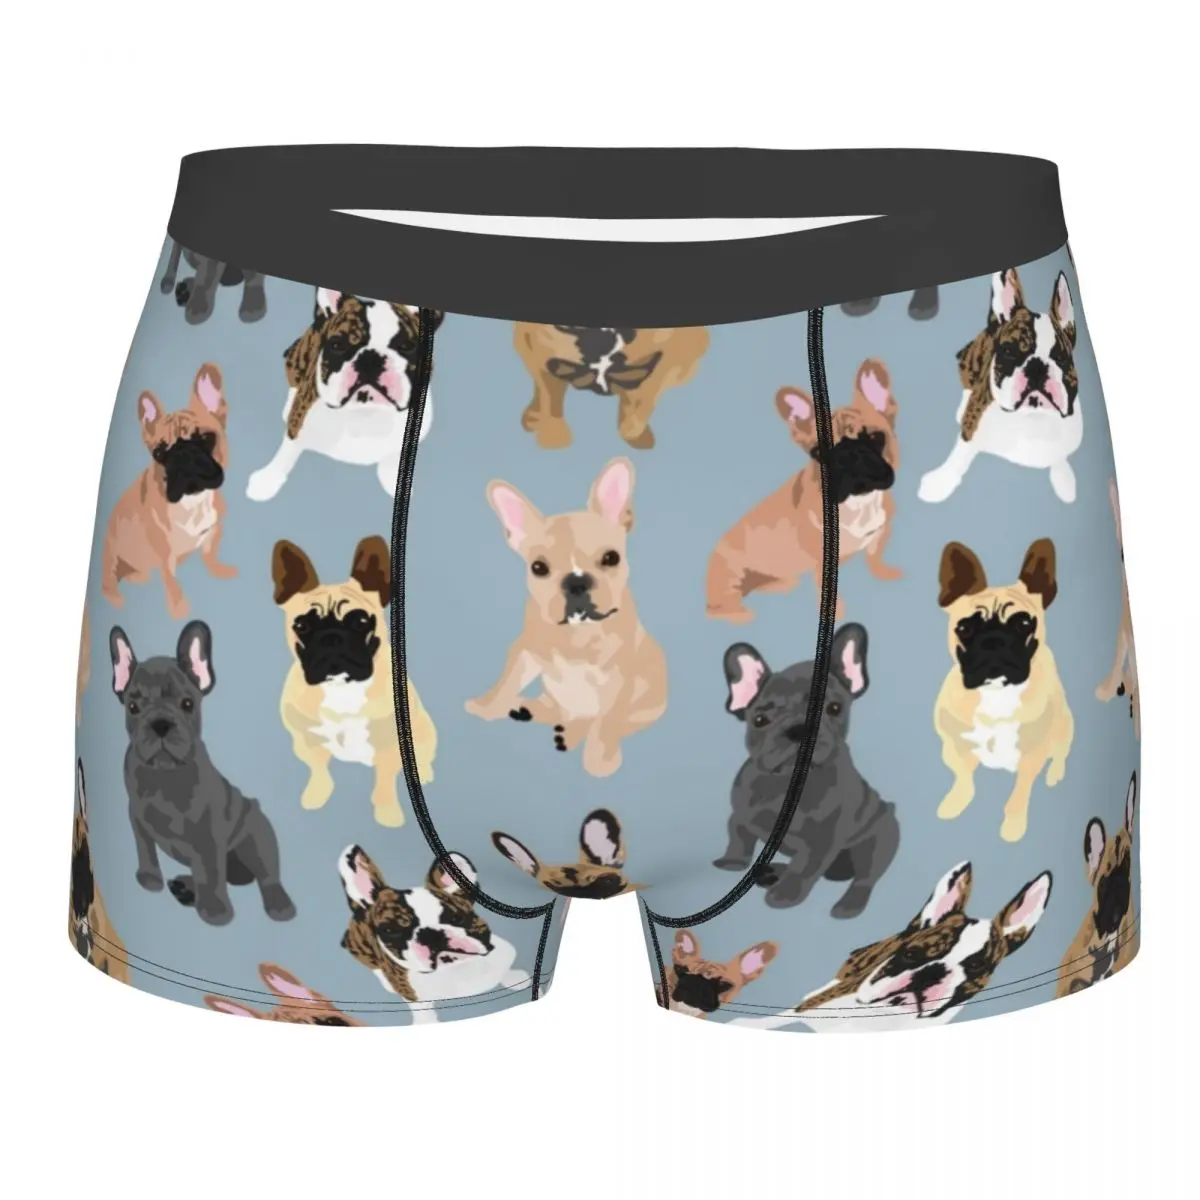 

Frenchie French Bulldog Men's Underwear Cute Pug Dog Boxer Shorts Panties Humor Soft Underpants for Homme